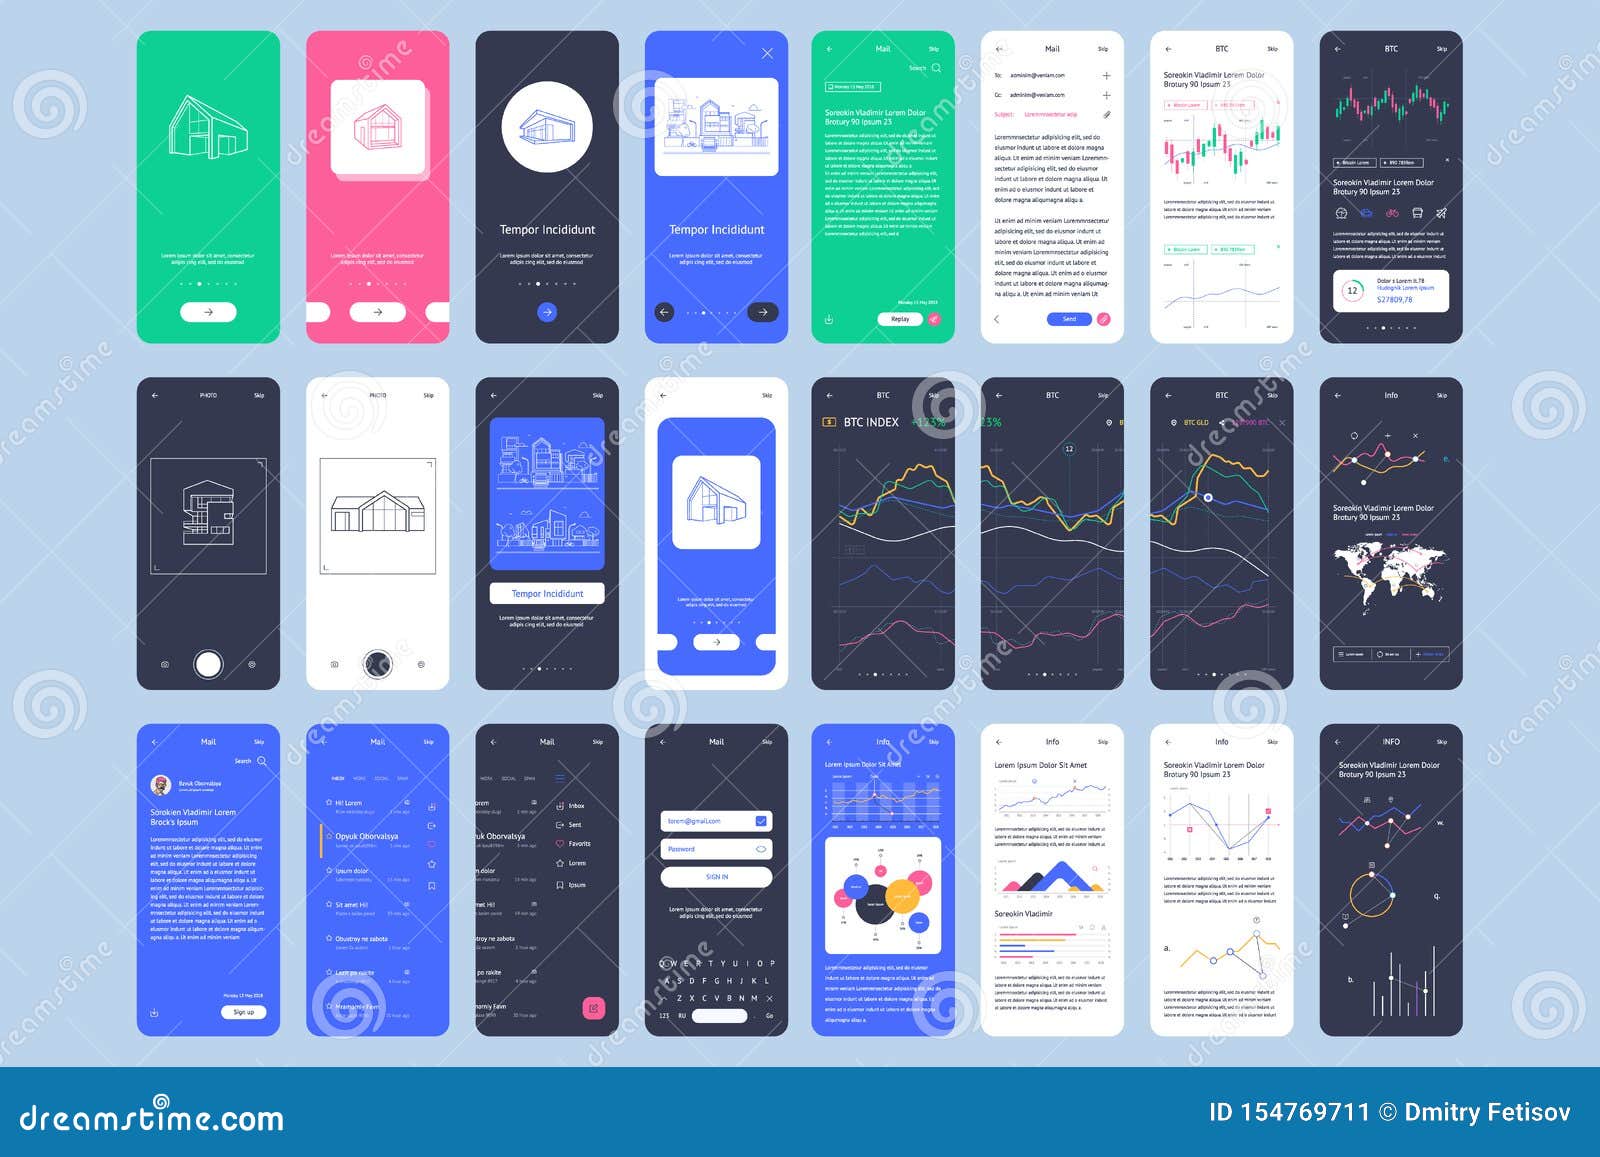 Material Design Mail App Kit For Mobile With Wireframe Stock Vector